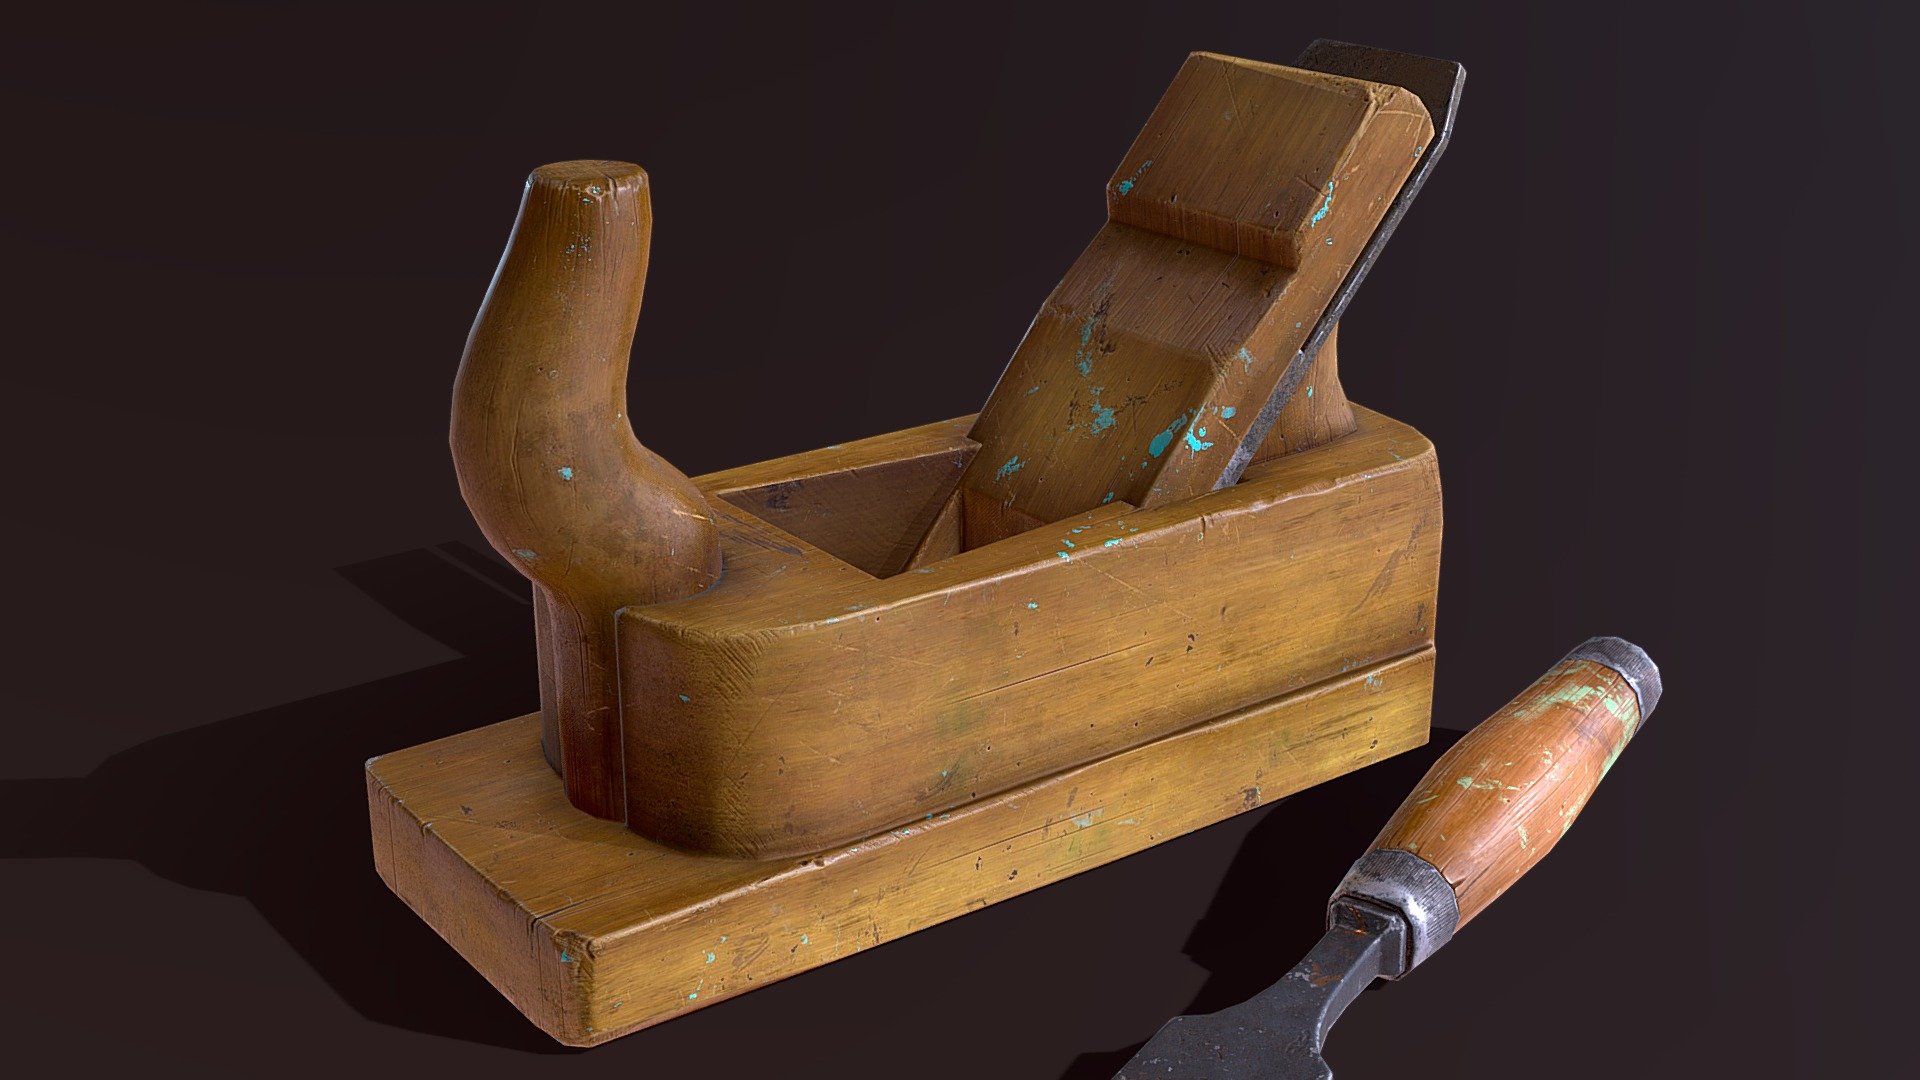 Models of the woodworking tools created in Blender, texturing - Substance Designer and Substance Painter. Project on my Artstation https://www.artstation.com/artwork/Po589B - Woodworking Tools - 3D model by kbohush 3d model